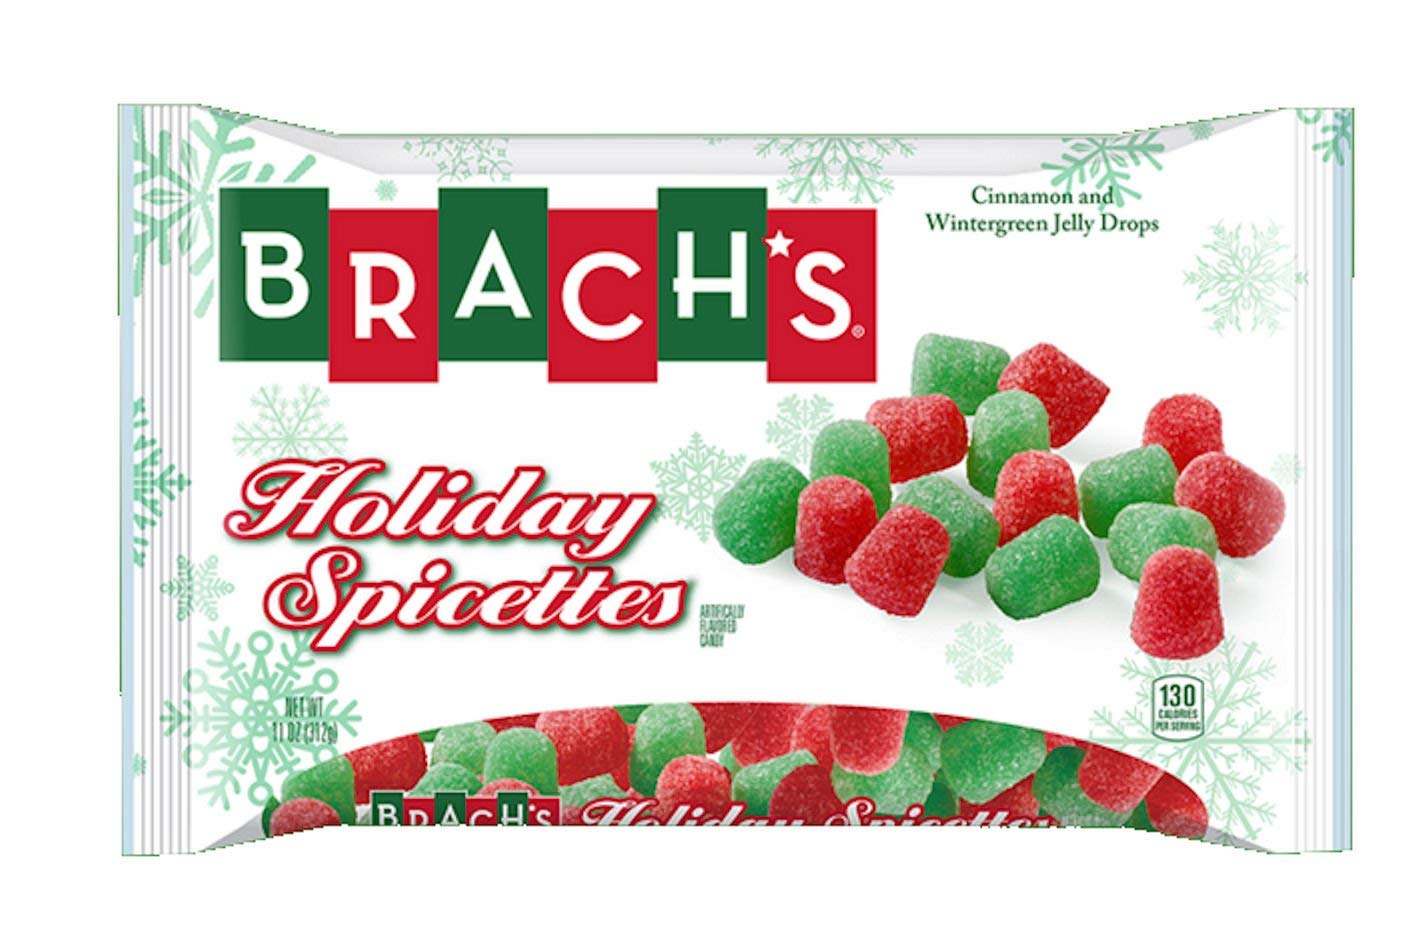  Brachs Holiday Spicettes, Red and Green Christmas Gumdrops - Cinnamon and Wintergreen Jelly Drops